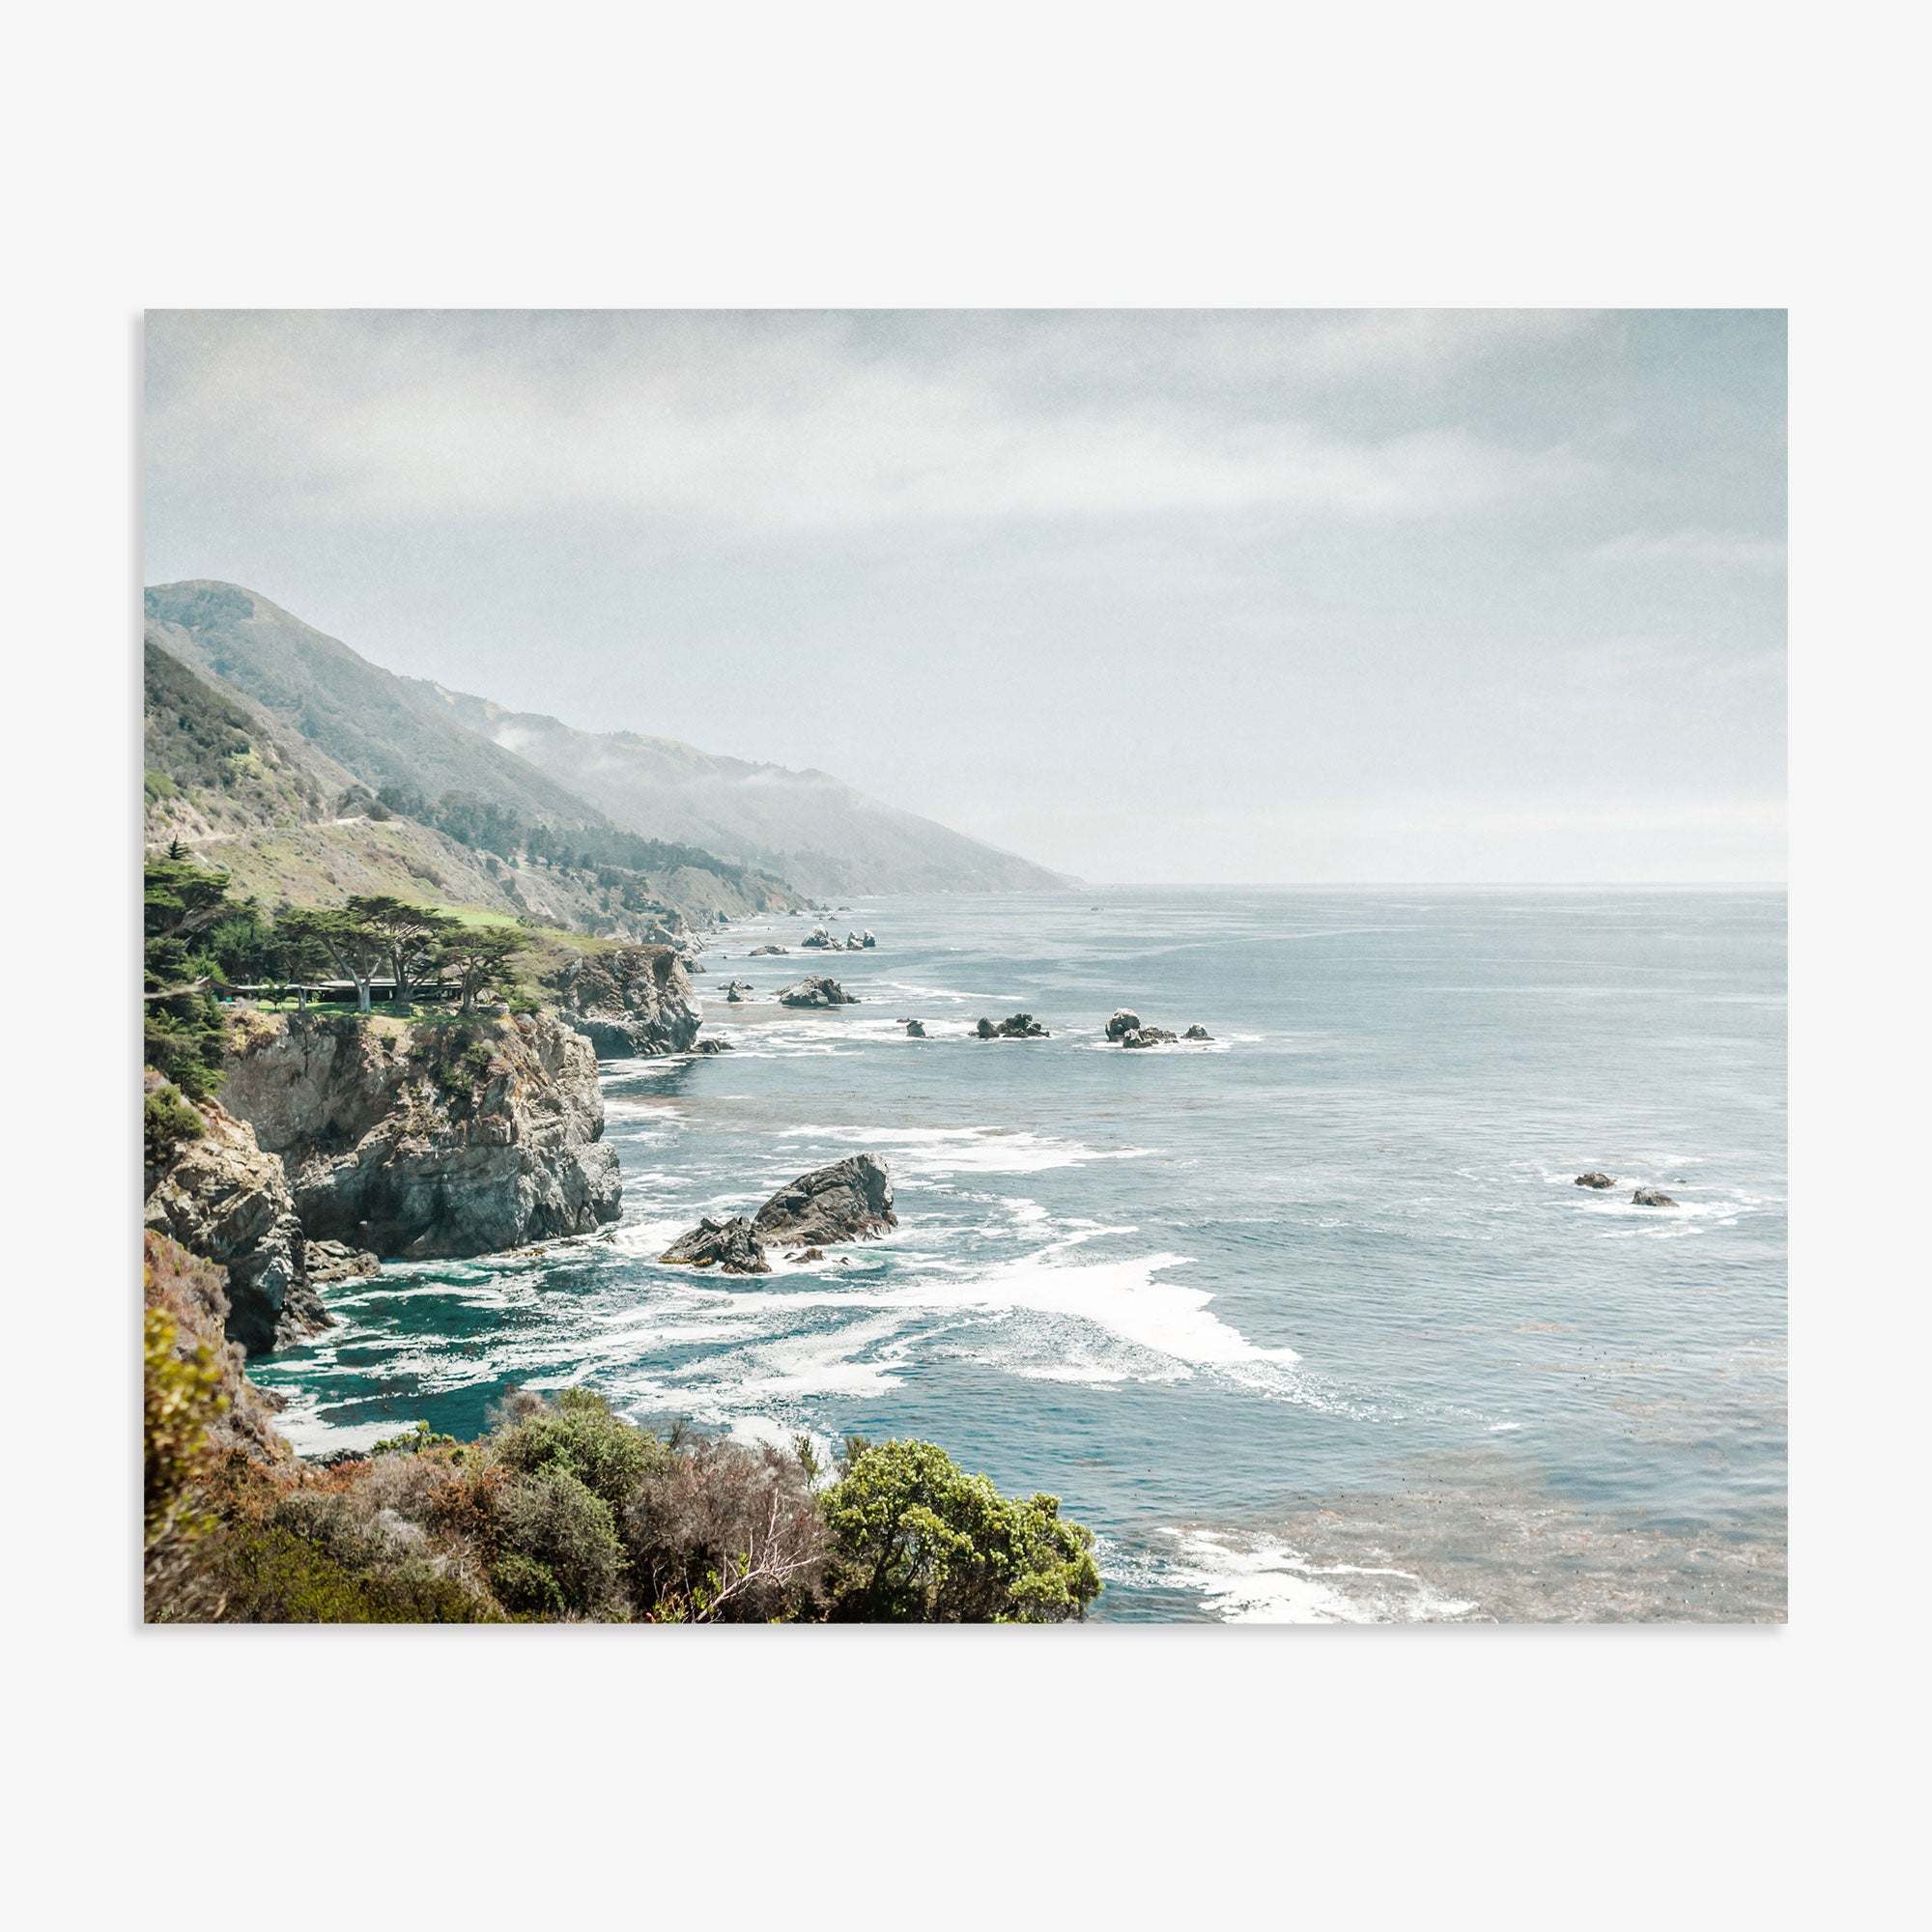 A scenic view of a misty coastline along California Highway 1 with rugged cliffs and waves crashing against the shore, under a soft cloudy sky. The landscape includes lush greenery and distant rocky outc featuring the Offley Green Big Sur Landscape Print, 'Rocky Rocks'.